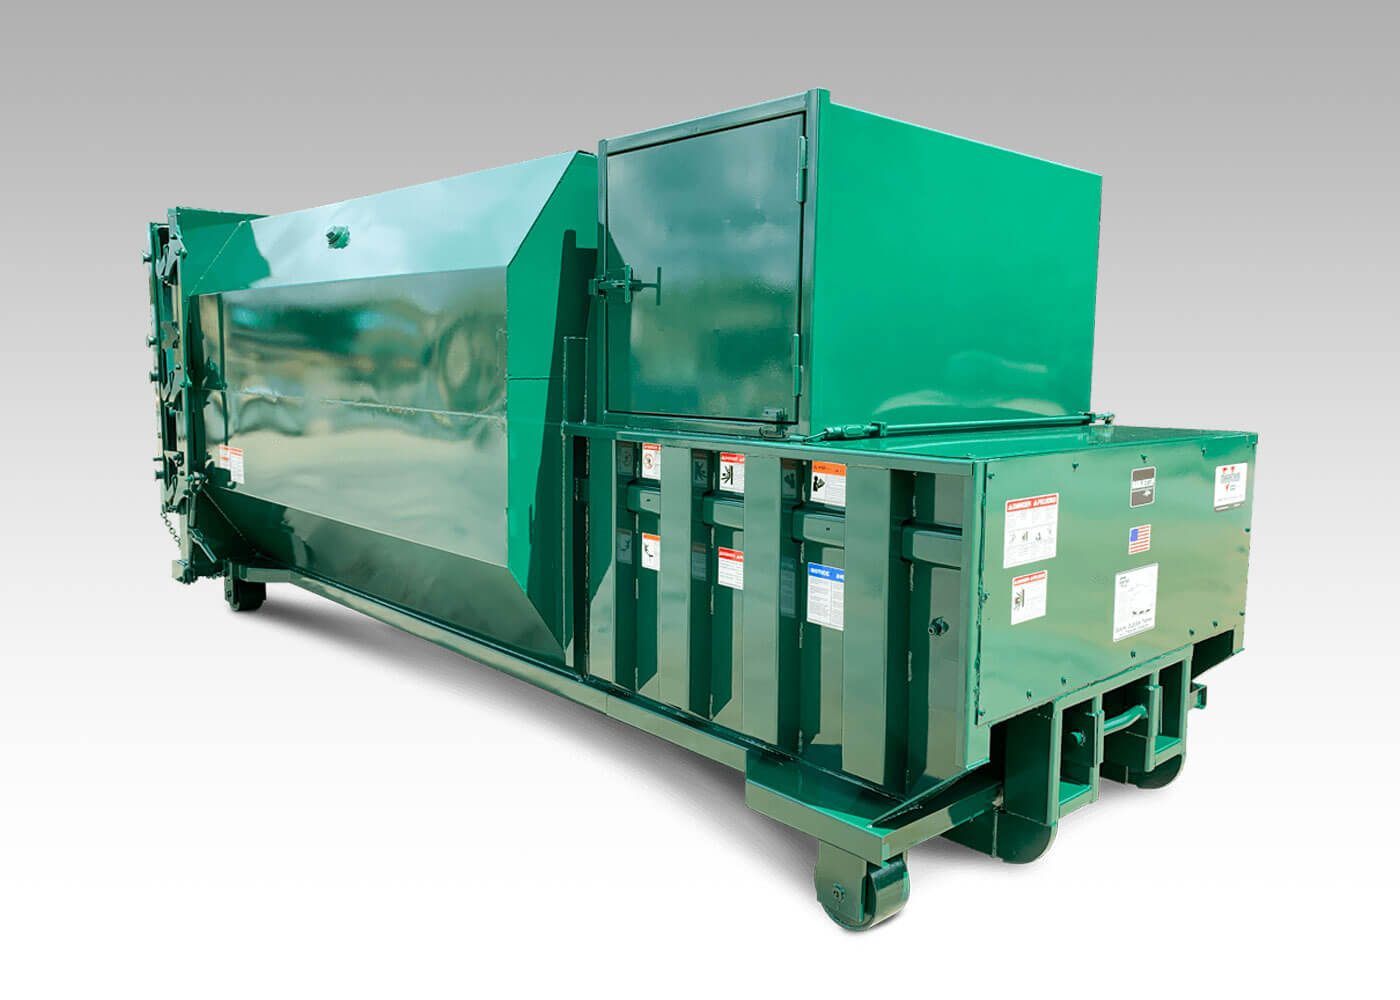 RJ-250SC self contained trash compactor from marathon compacton equipment company